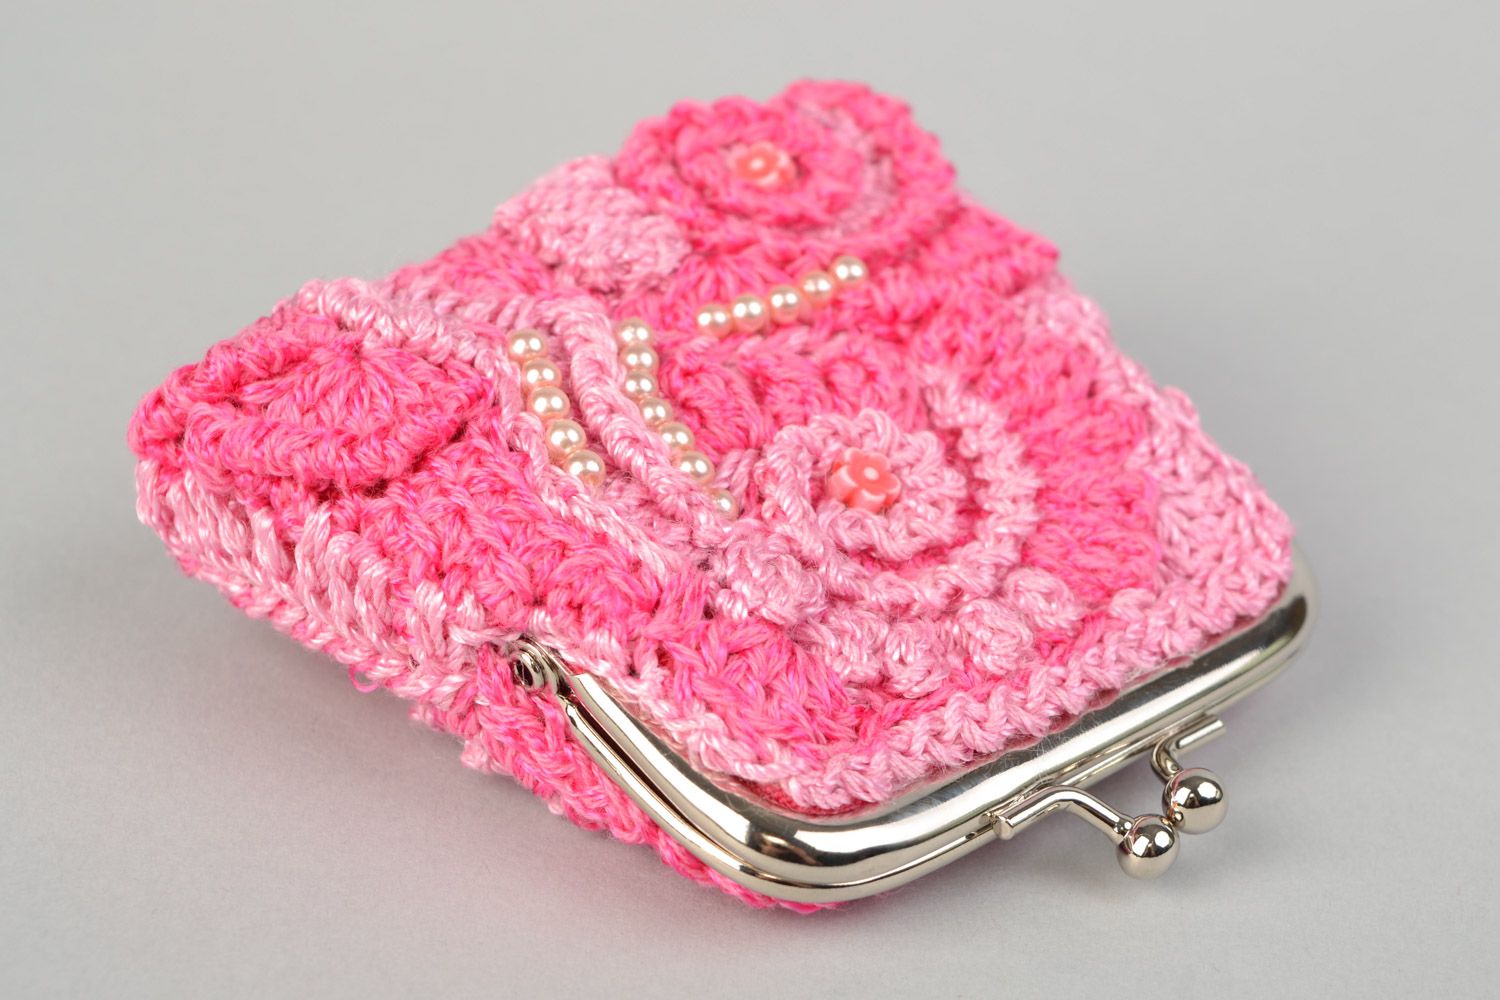 Handmade pink lacy coin purse crochet of cotton threads with fermail fastener photo 5